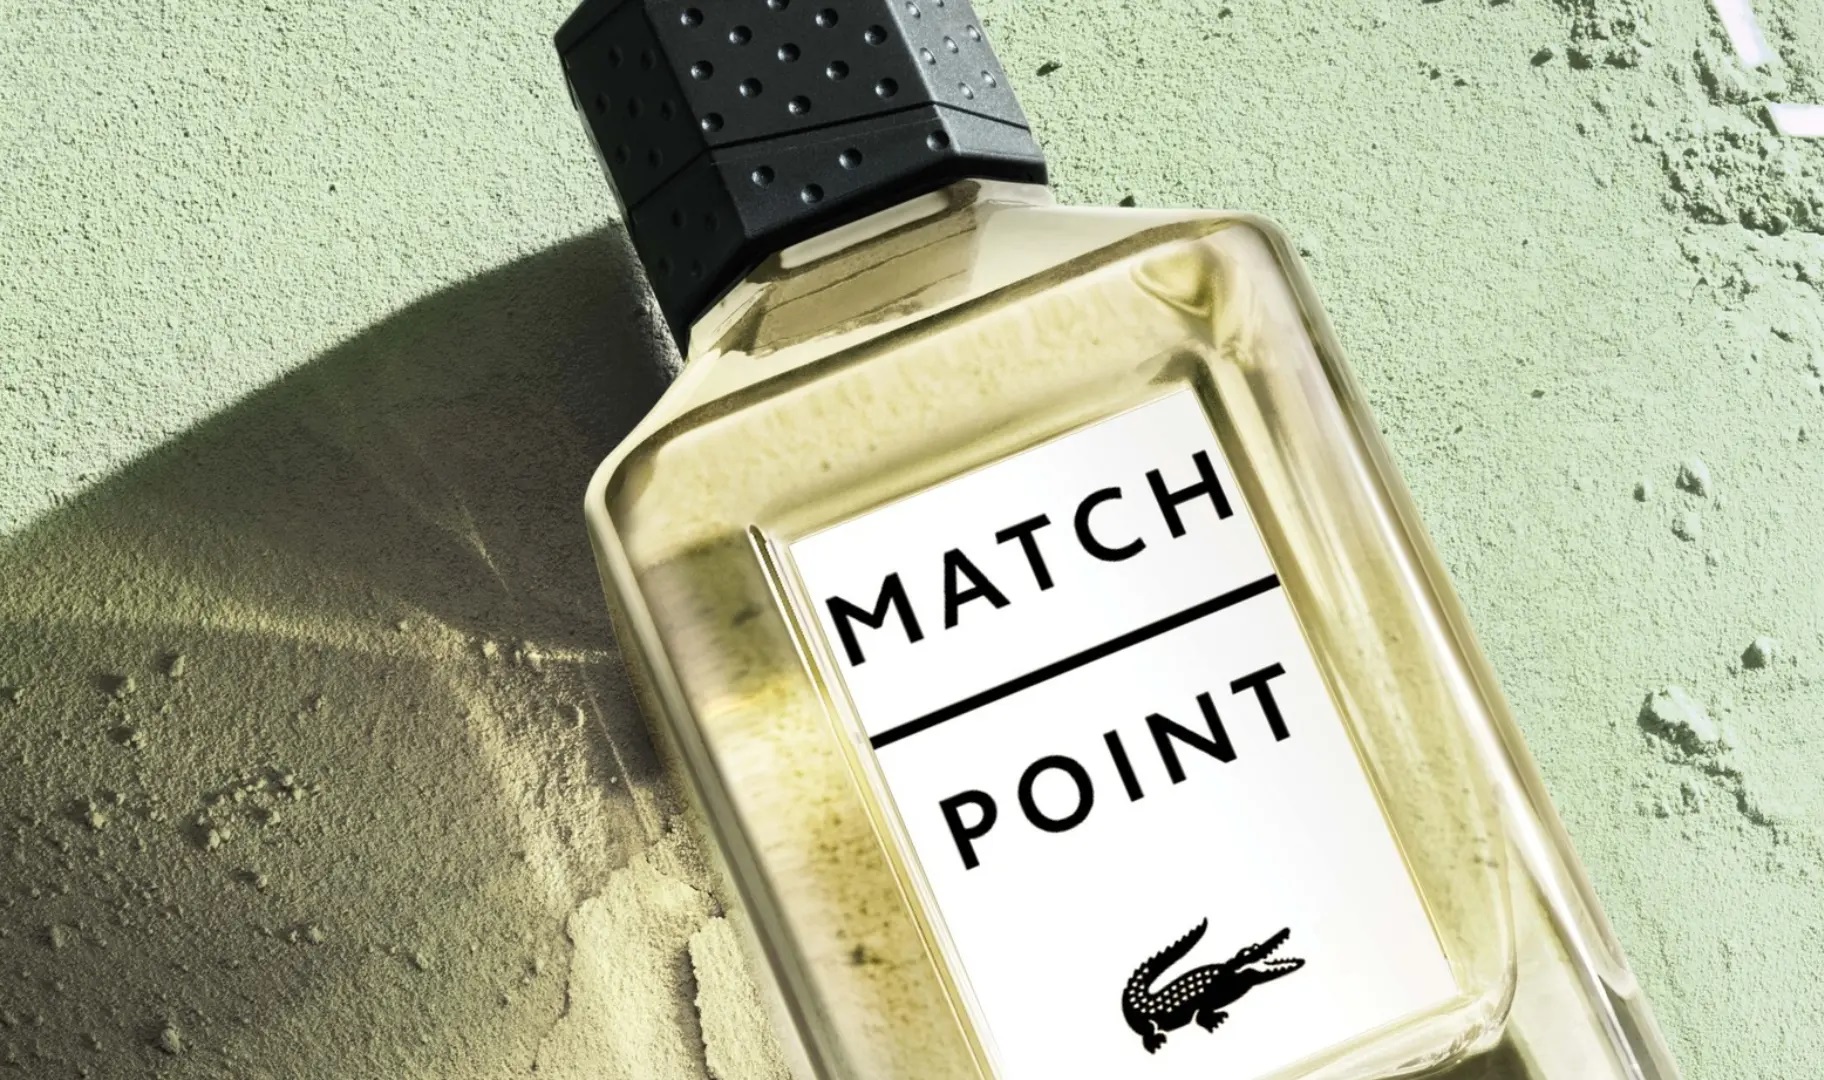 lacoste match point cologne opinie